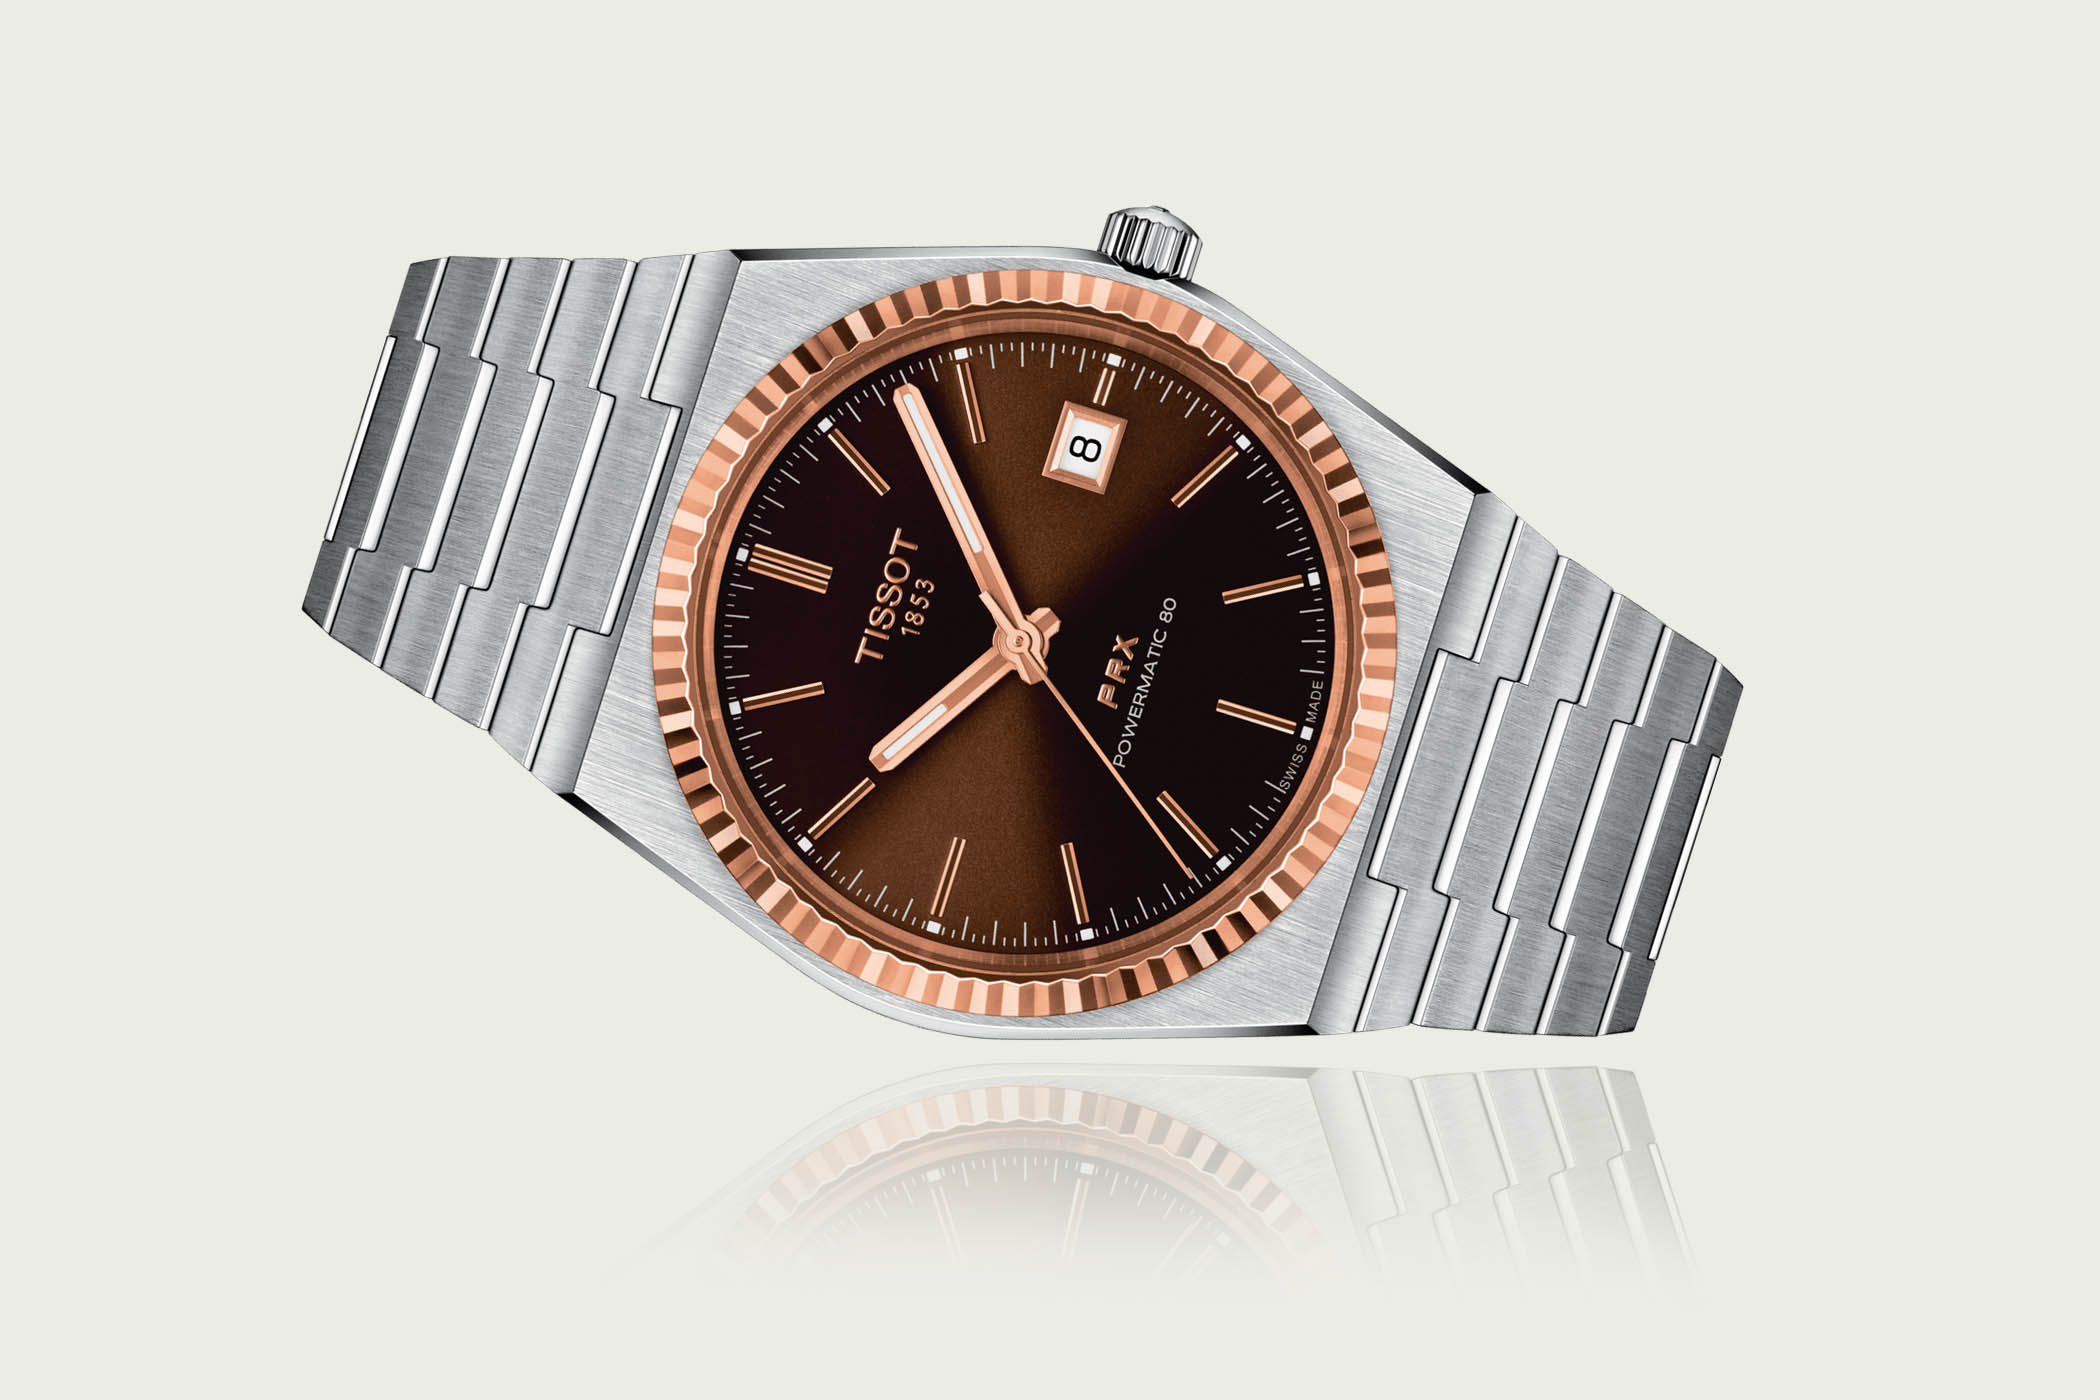 Tissot PRX Powermatic 80 Steel and Gold Fluted Bezel Brown Dial - T931.407.41.291.00